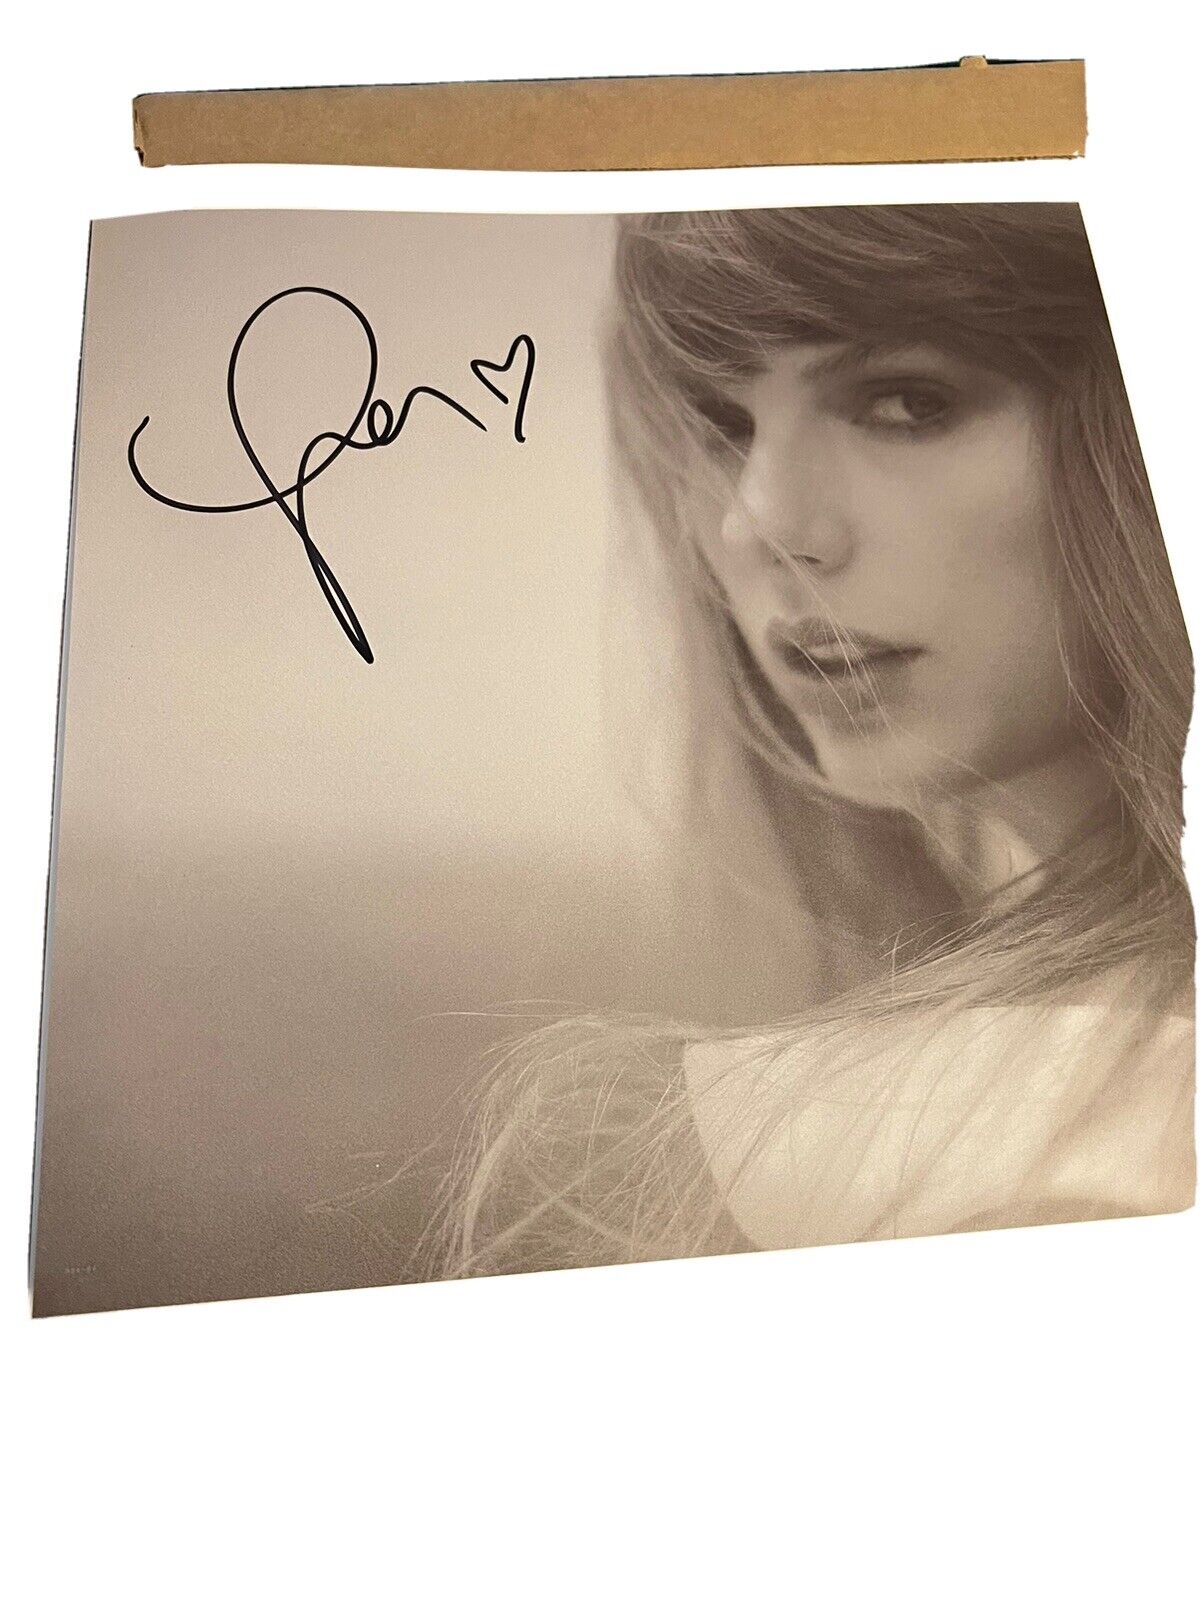 Taylor Swift Tortured Poets Department “The Manuscript” Vinyl With Signed Poster